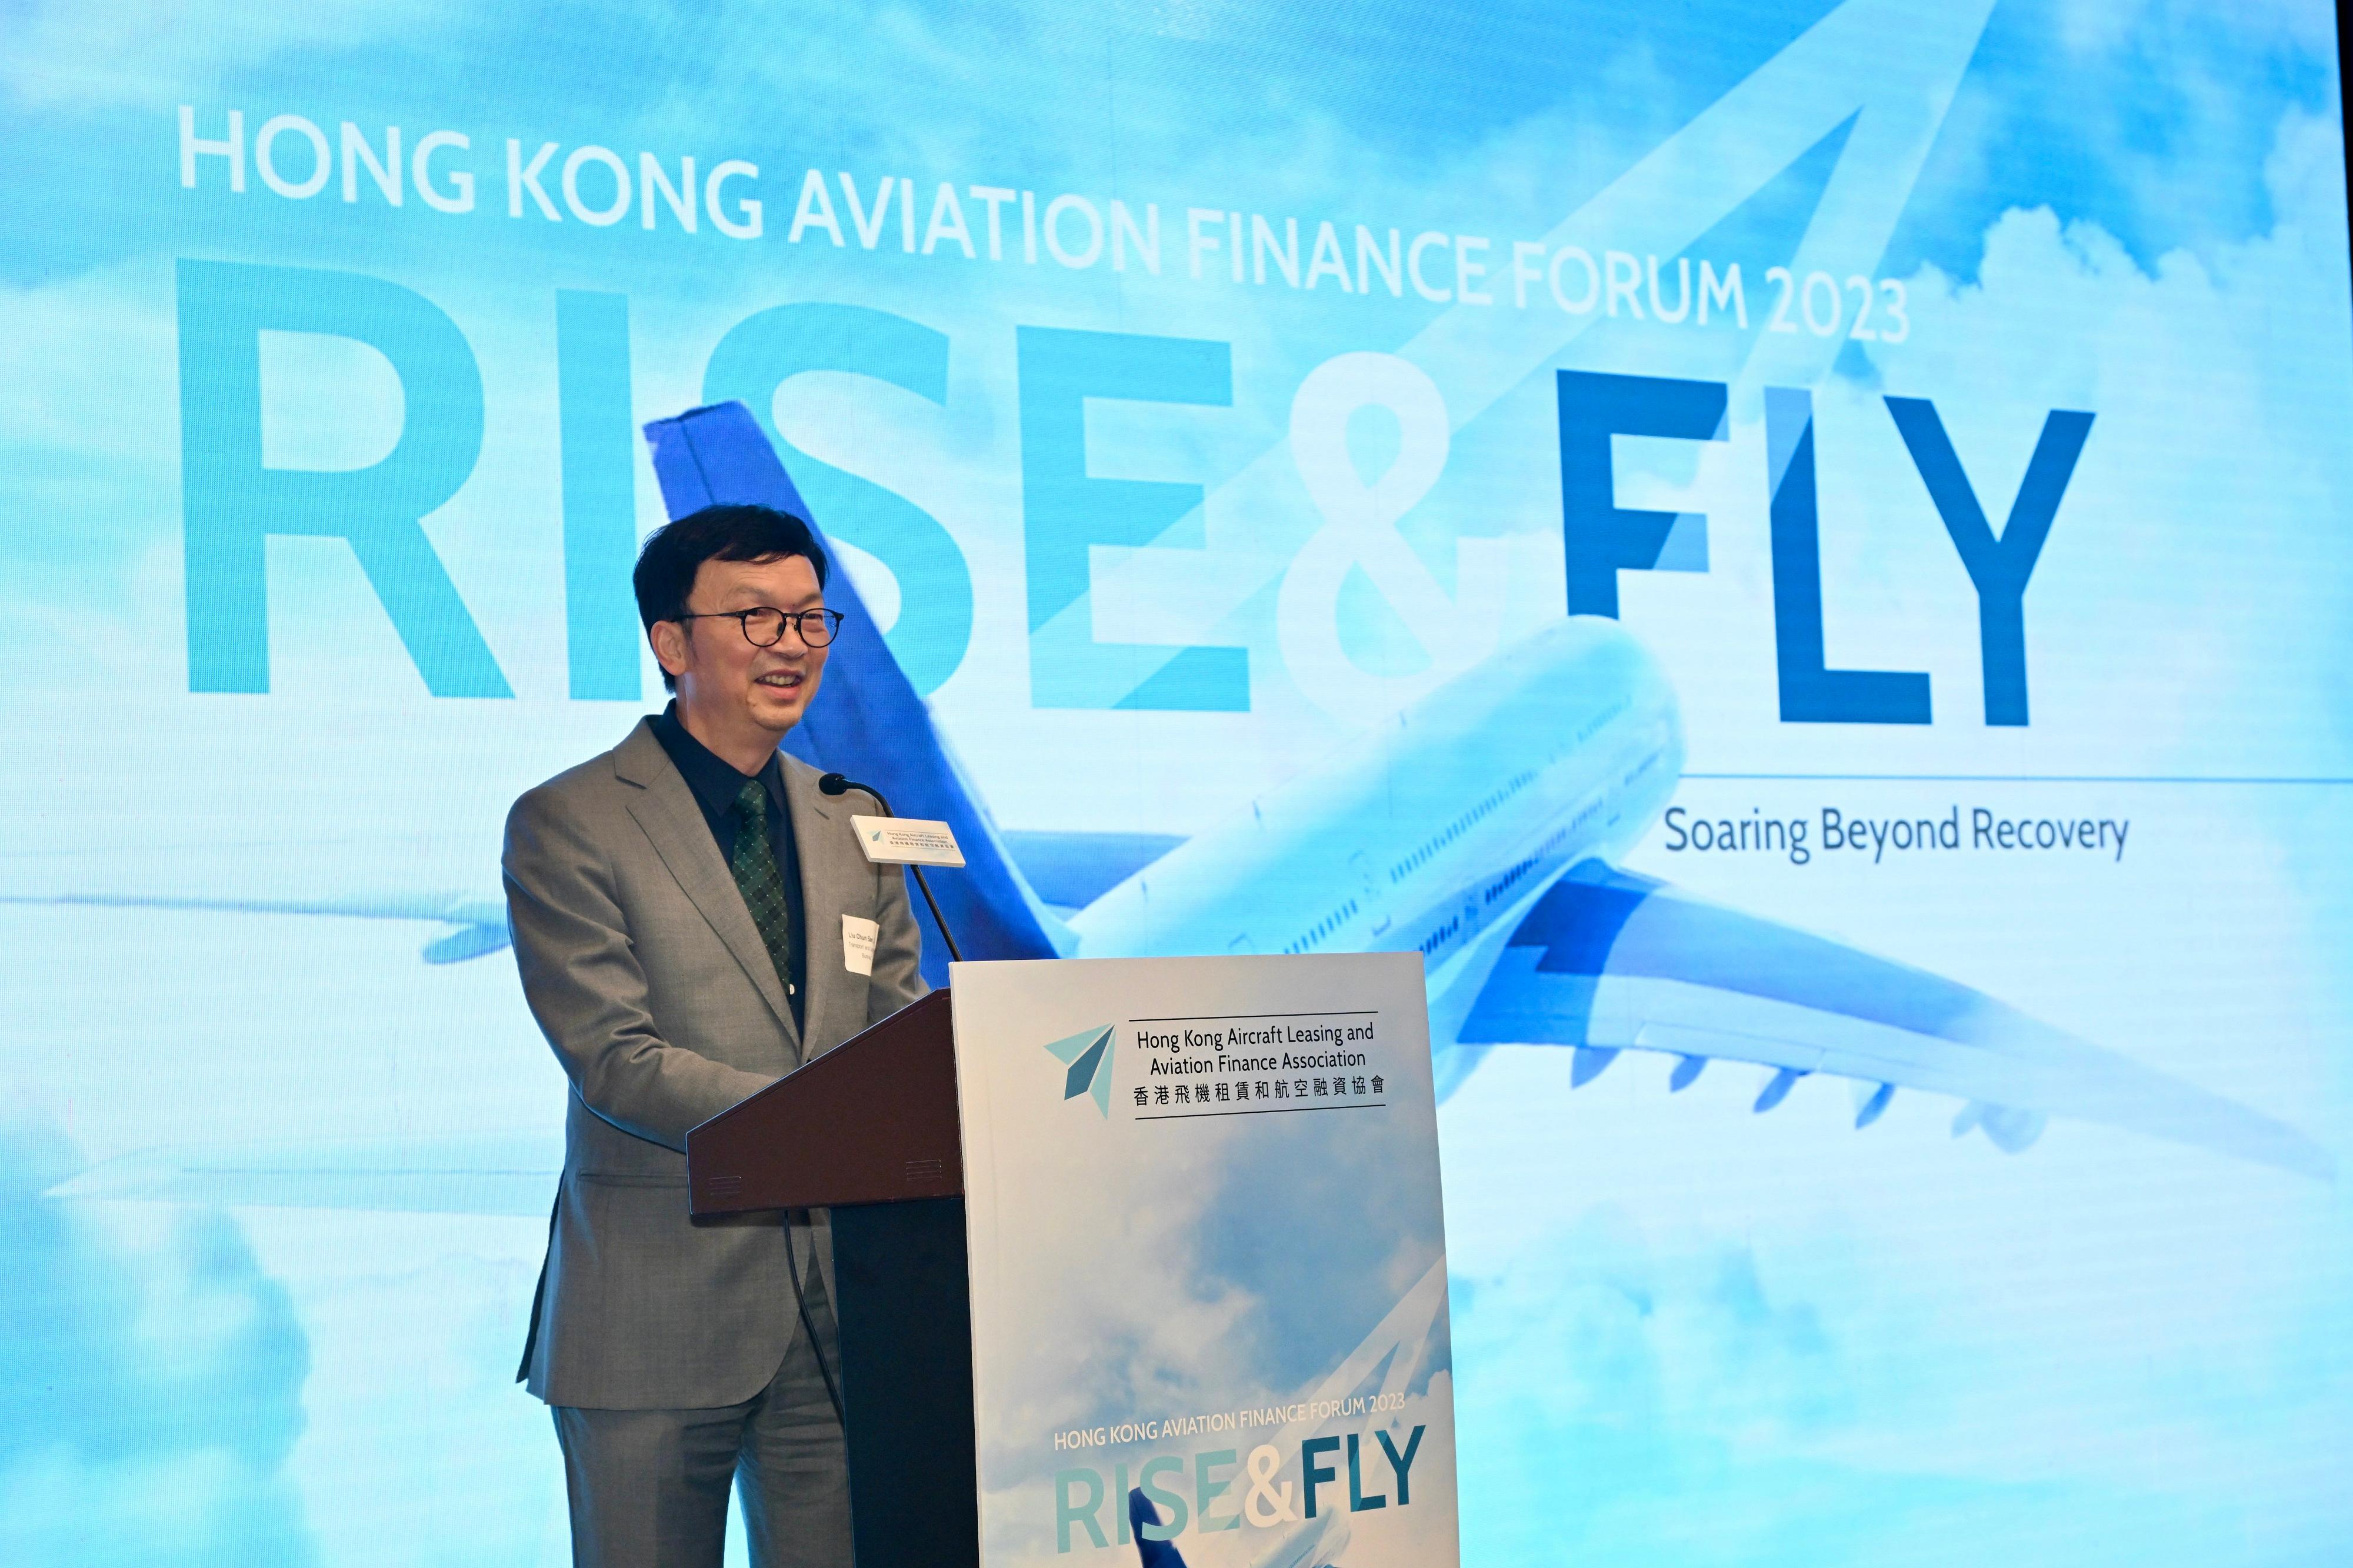 The Acting Secretary for Transport and Logistics, Mr Liu Chun-san, today (December 4) delivers opening remarks at the Hong Kong Aviation Finance Forum 2023.